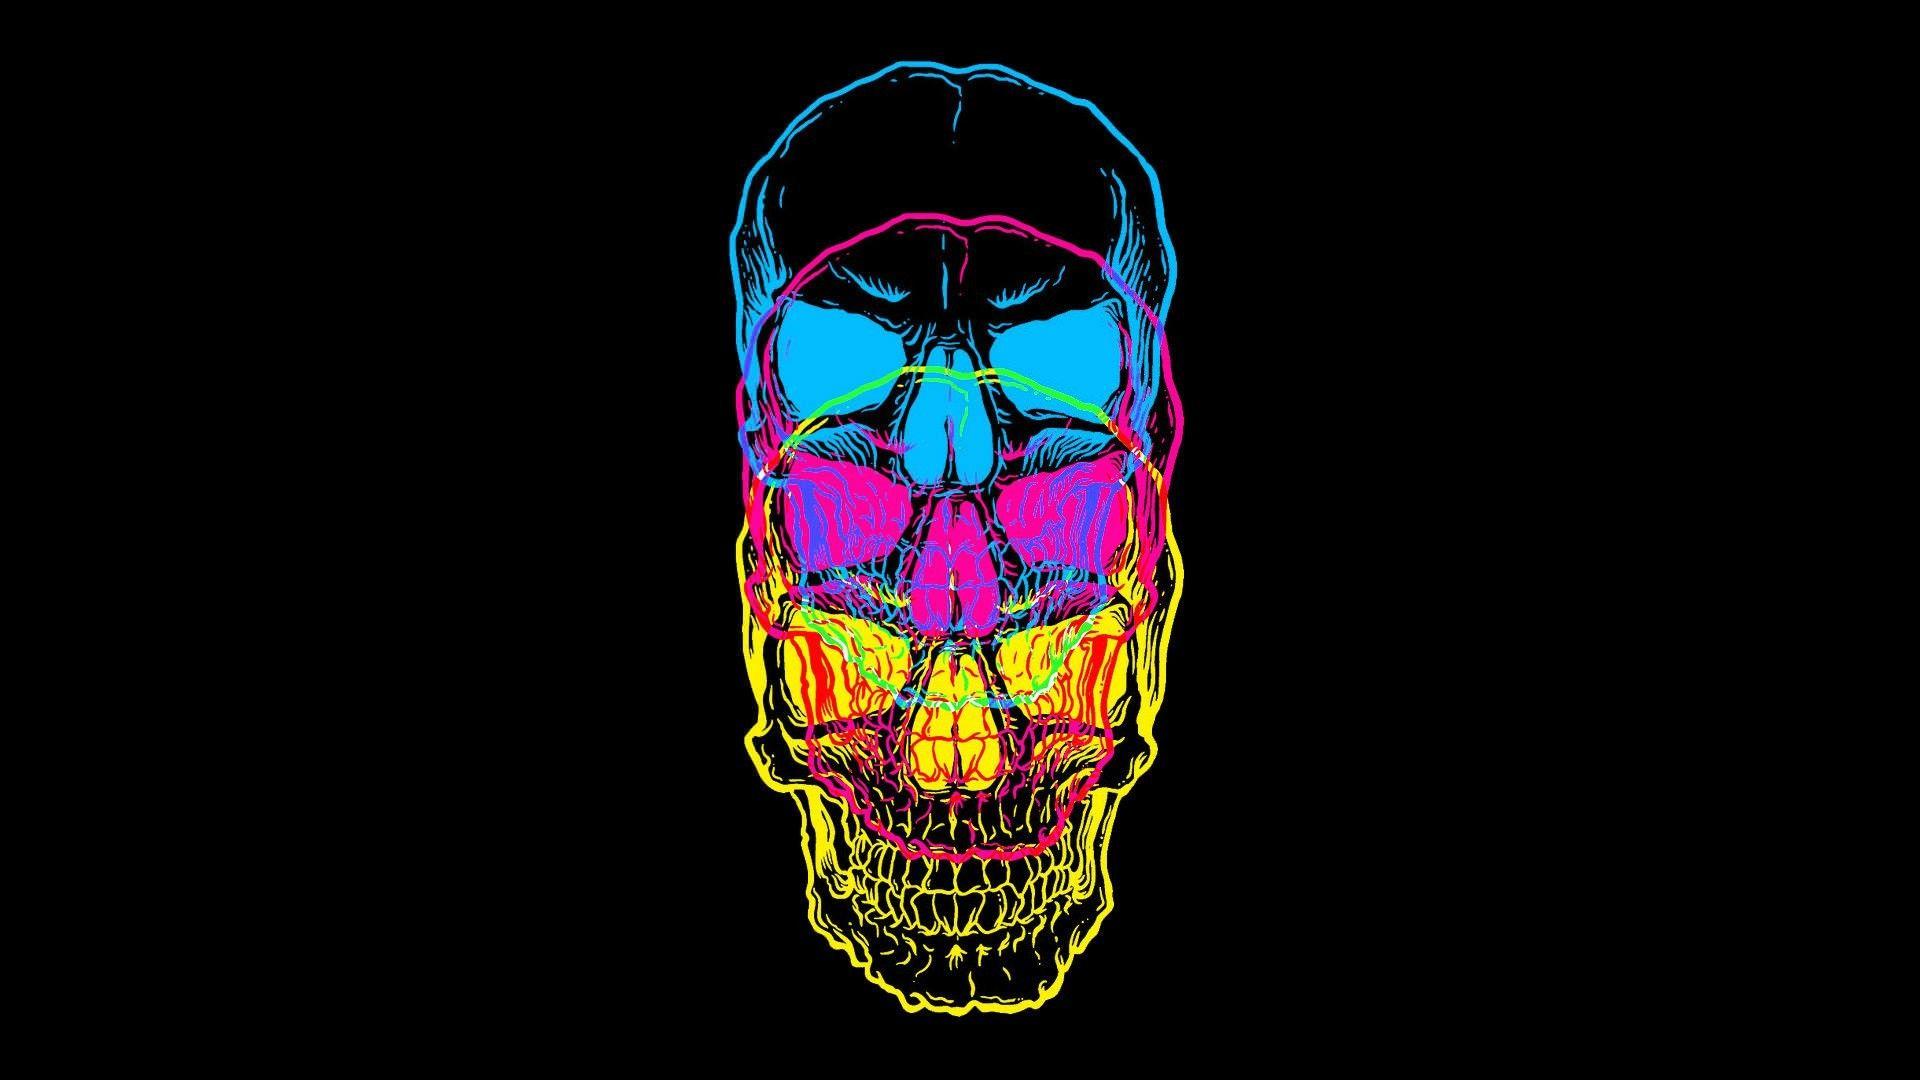 3D Colorful Skull Wallpapers - Top Free 3D Colorful Skull Backgrounds ...